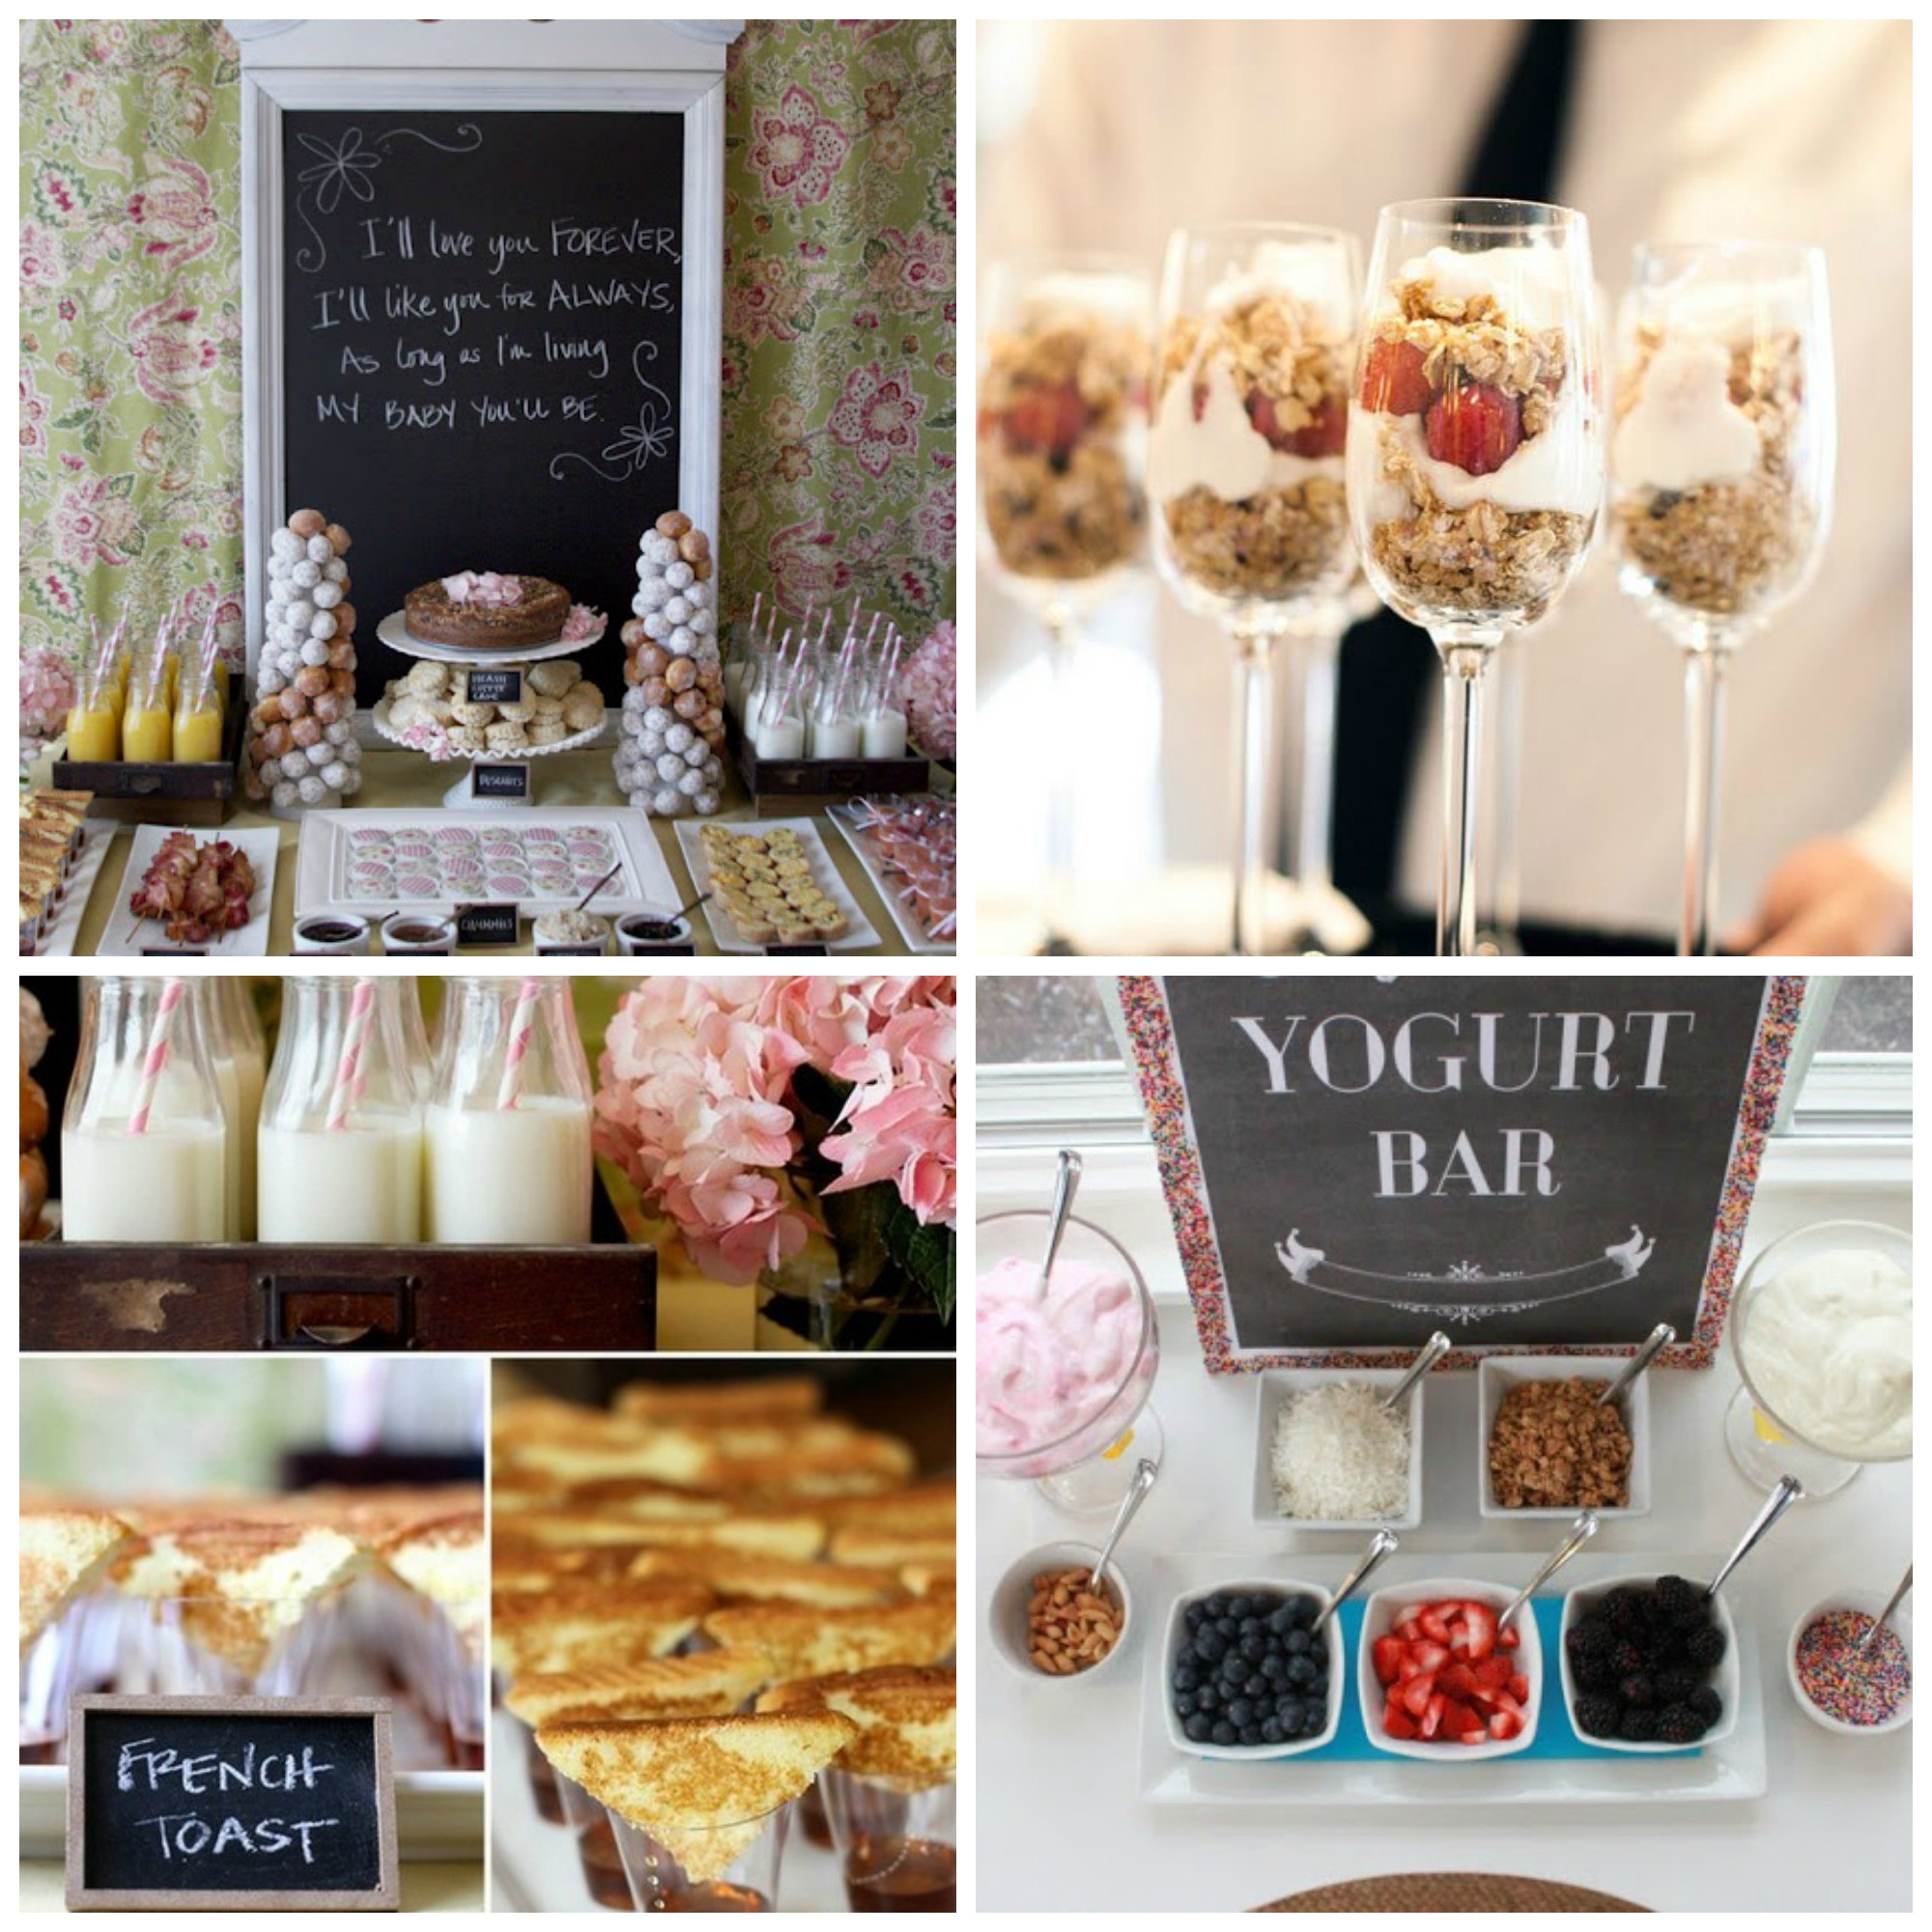 Wedding Engagement Party Ideas
 10 Fun Ideas For Your Engagement Party